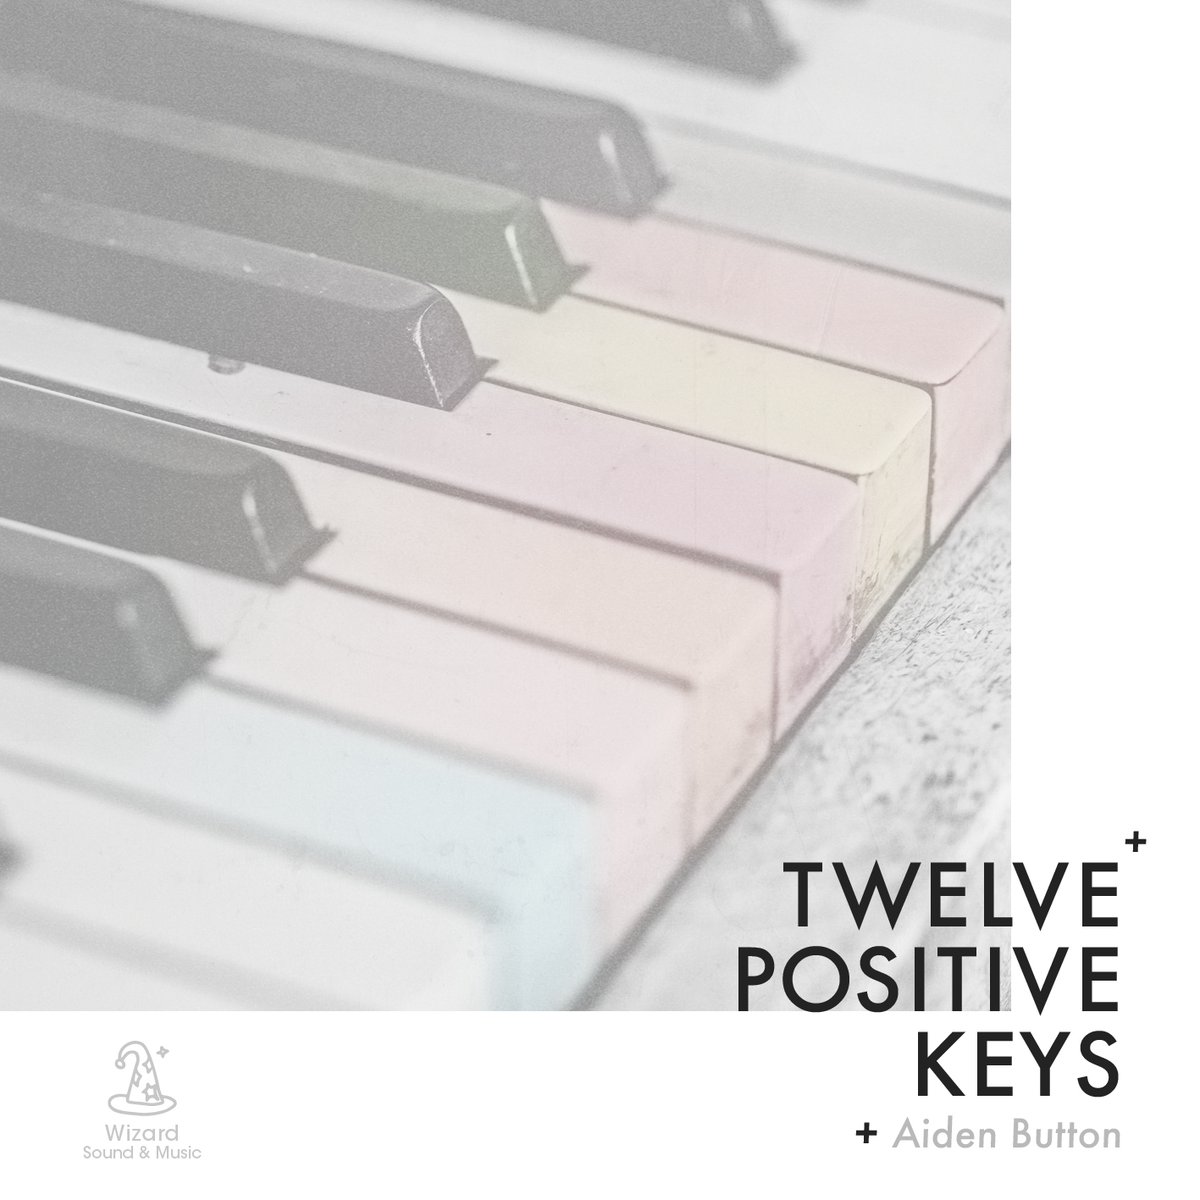 [OUT NOW - LISTEN TO TWELVE POSITIVE KEYS] lnkd.in/dy8iJY6z I'm really proud to announce my first full-leght album! Twelve Positive Keys it's an indivisible journey between the #colors of the #keys. Special thanks to: @SpotifyJP @Deezer @amazonmusic @AppleMusic @TIDAL